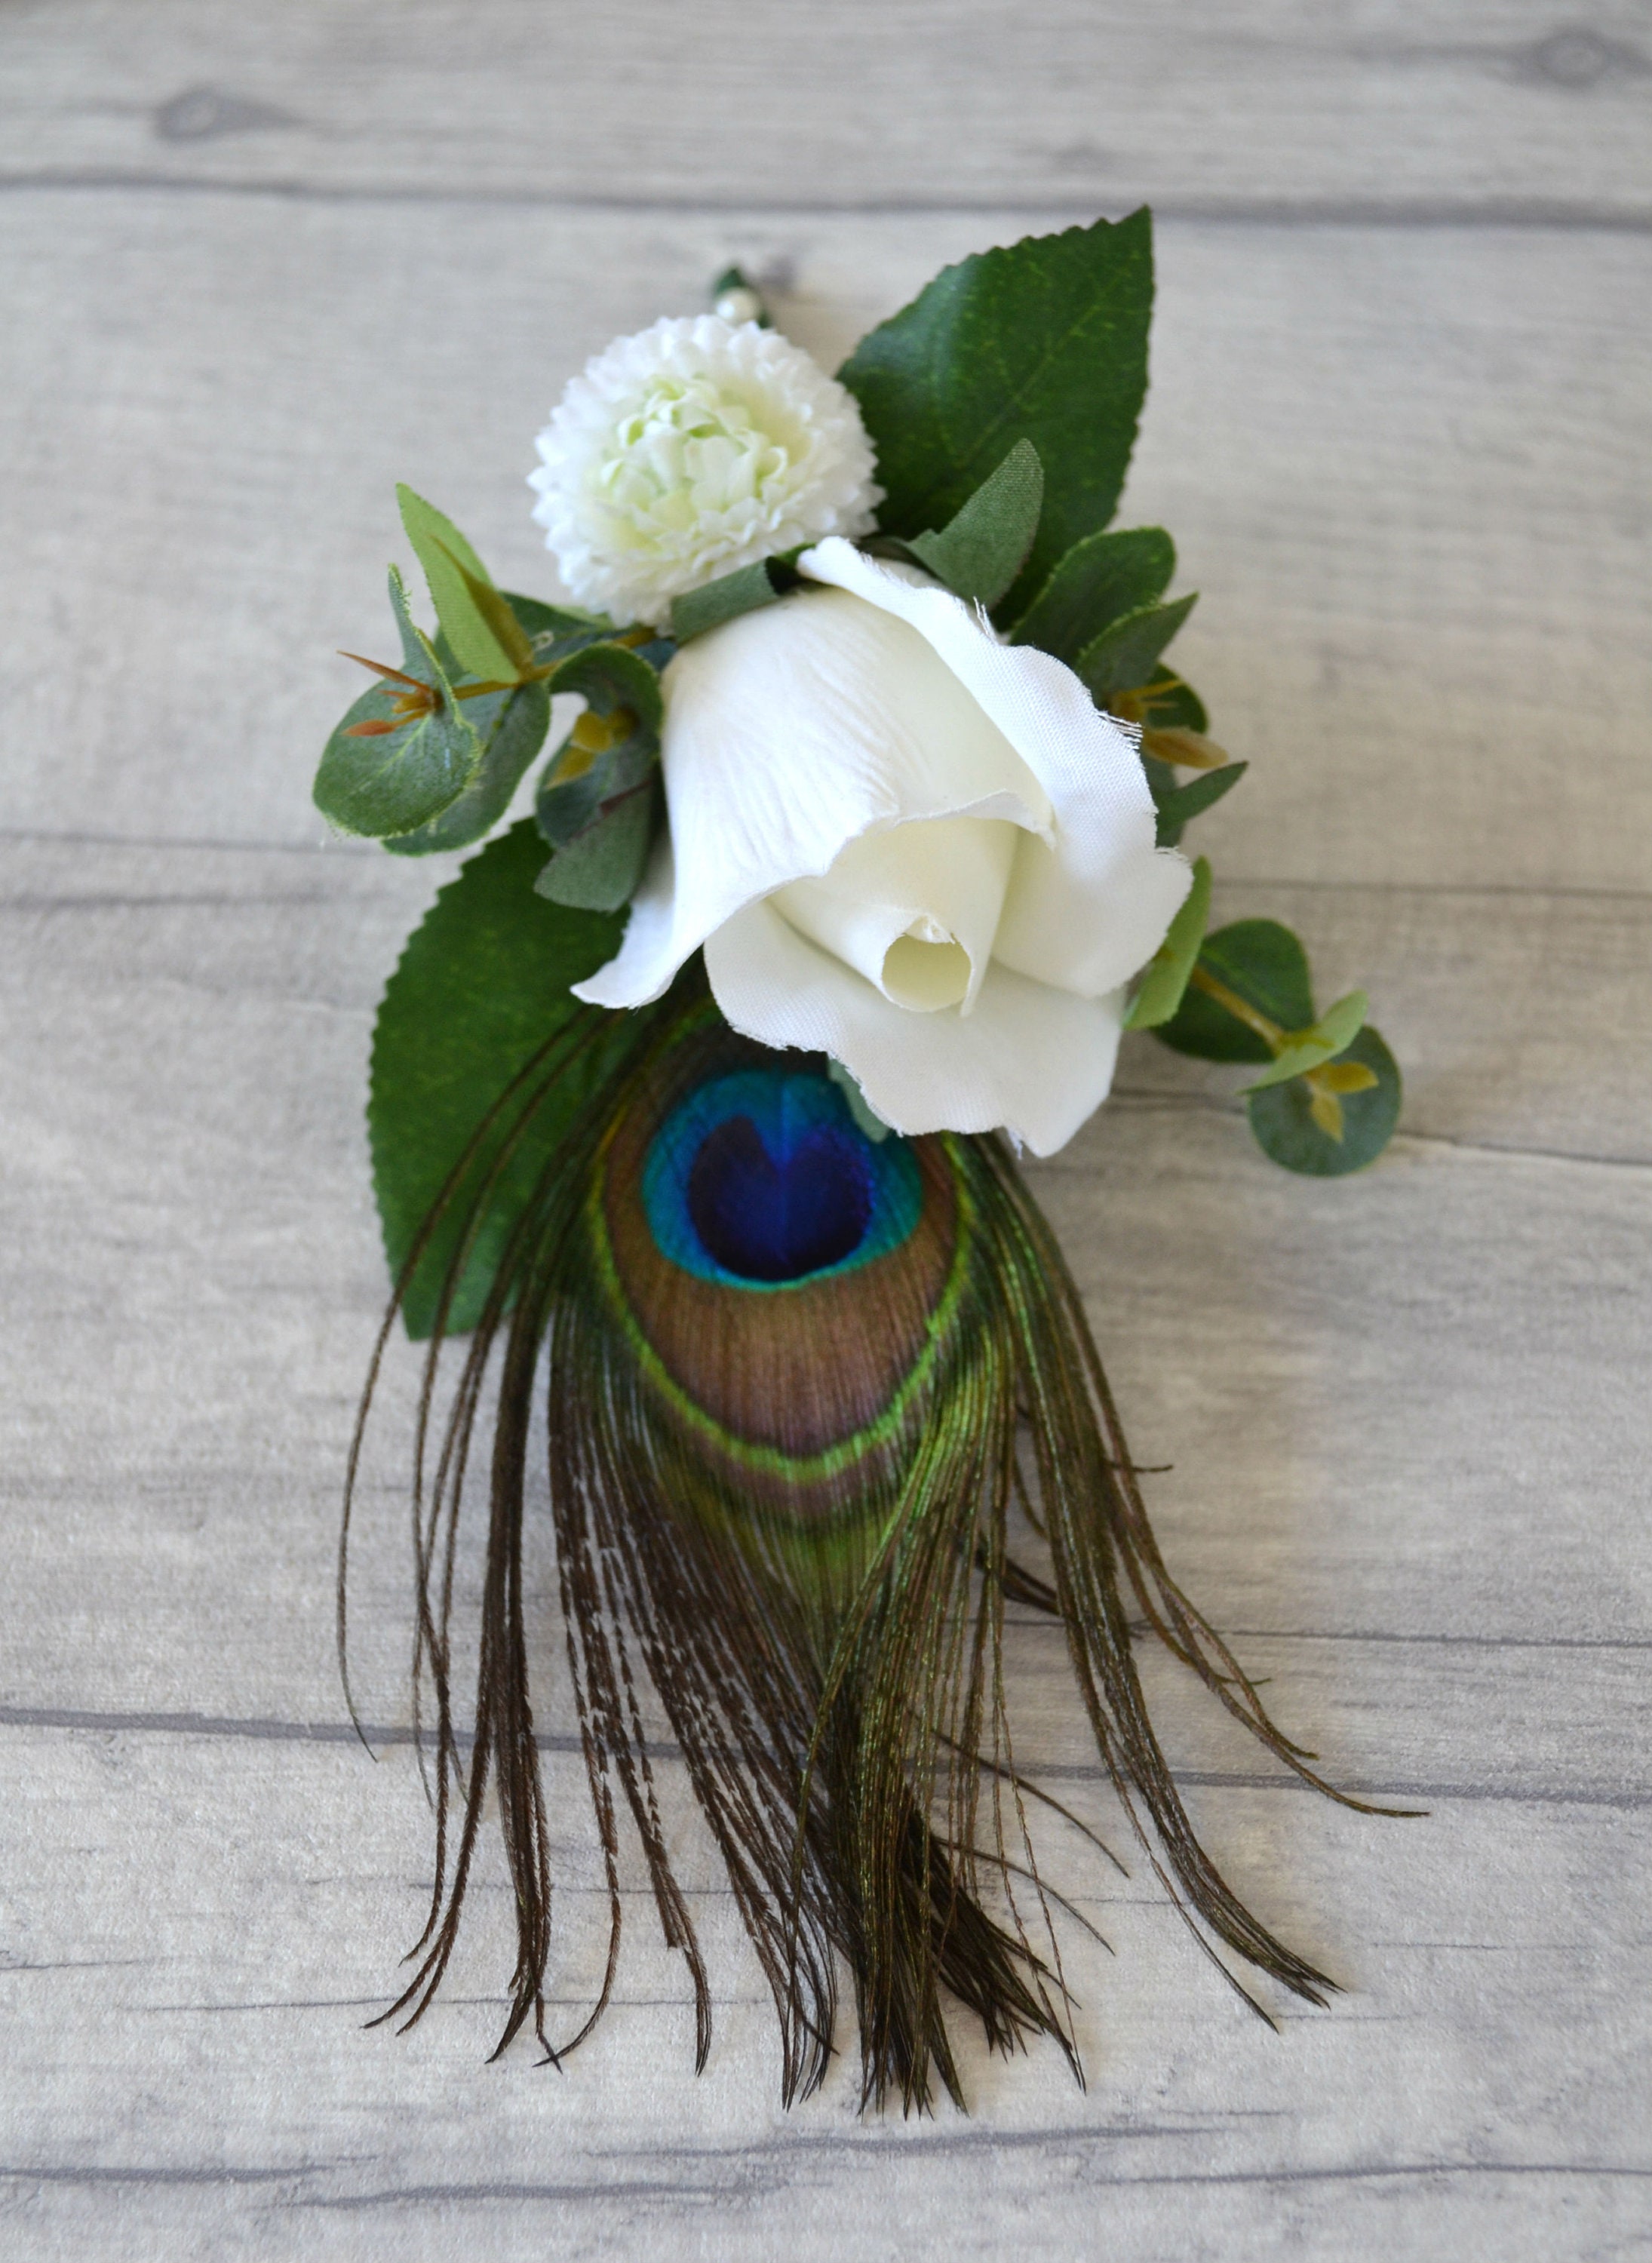 IVORY ROSE BUTTONHOLE PEARLS CORSAGE I DO GROOM BRIDES WEDDING FLOWERS 